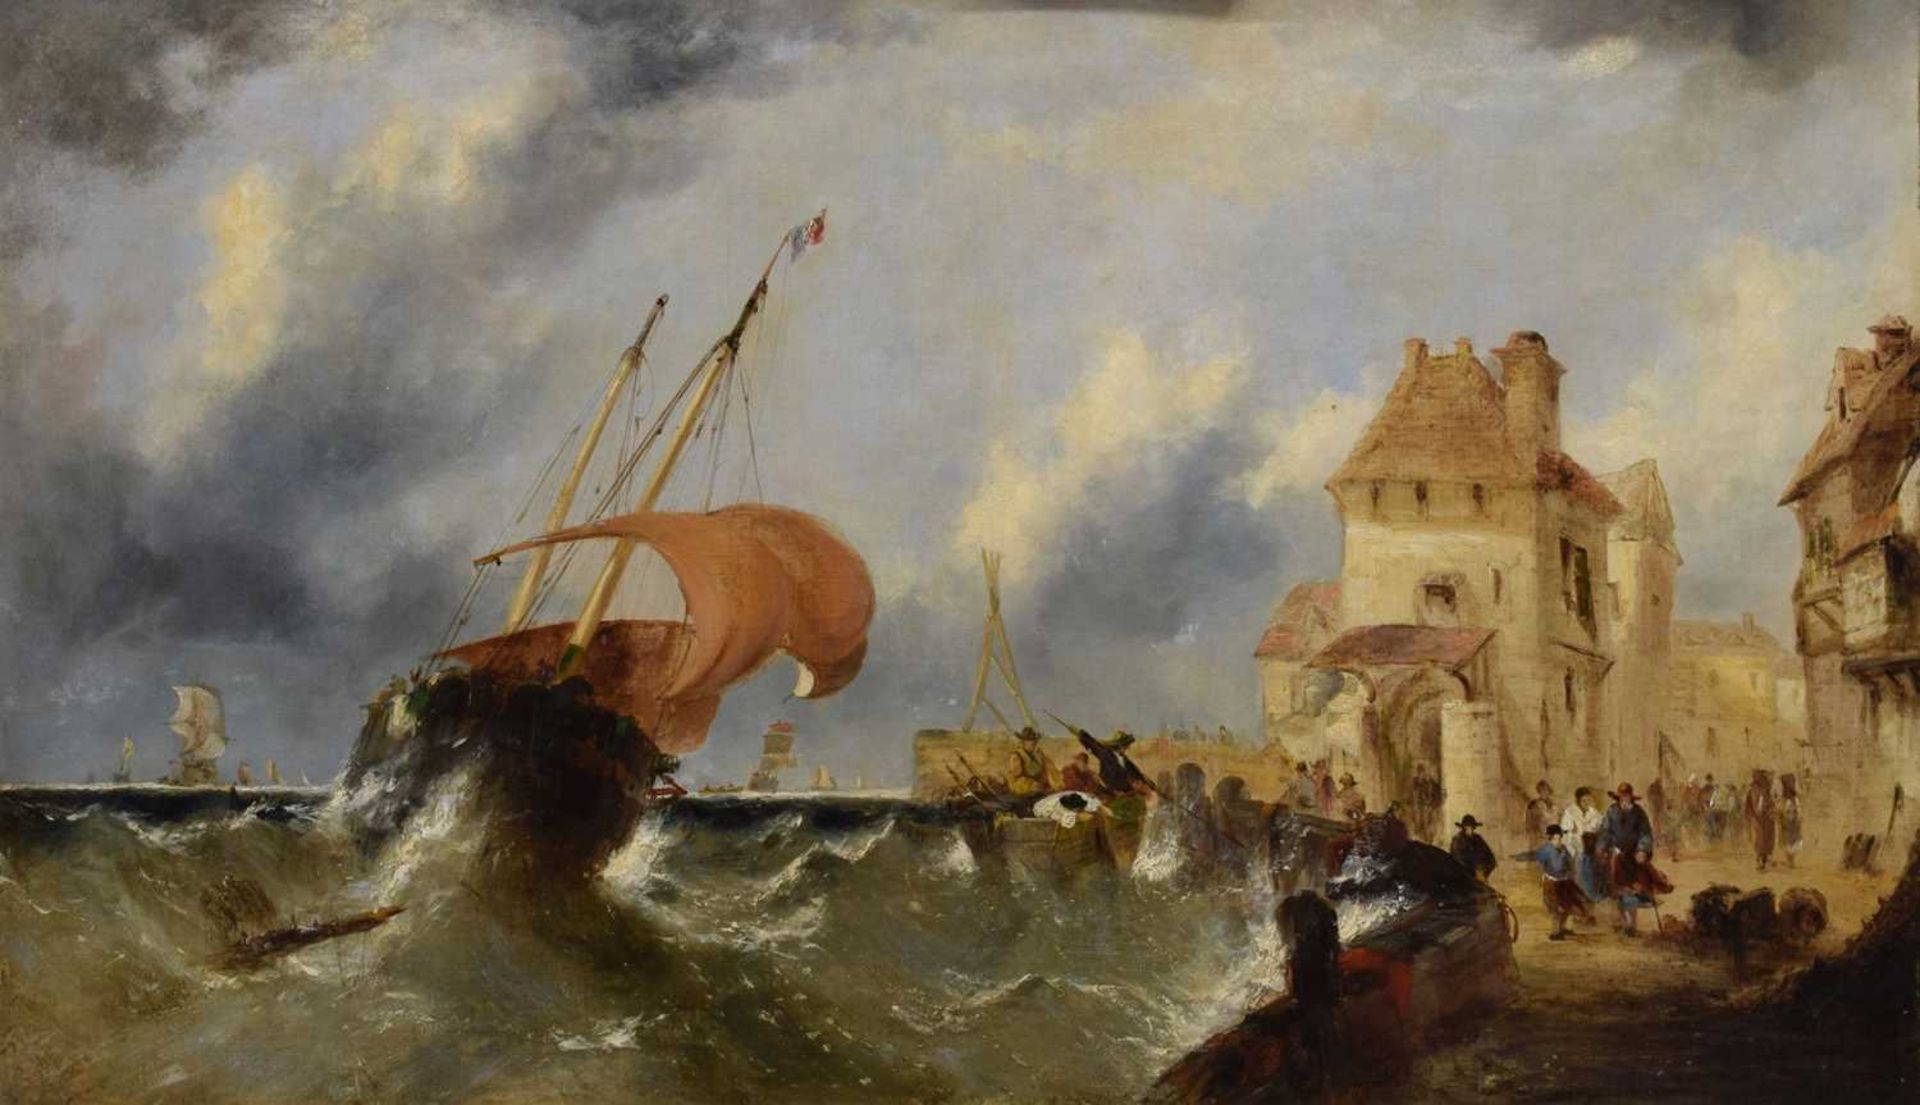 19th century continental school - Oil on canvas - Ship in a stormy coastal port